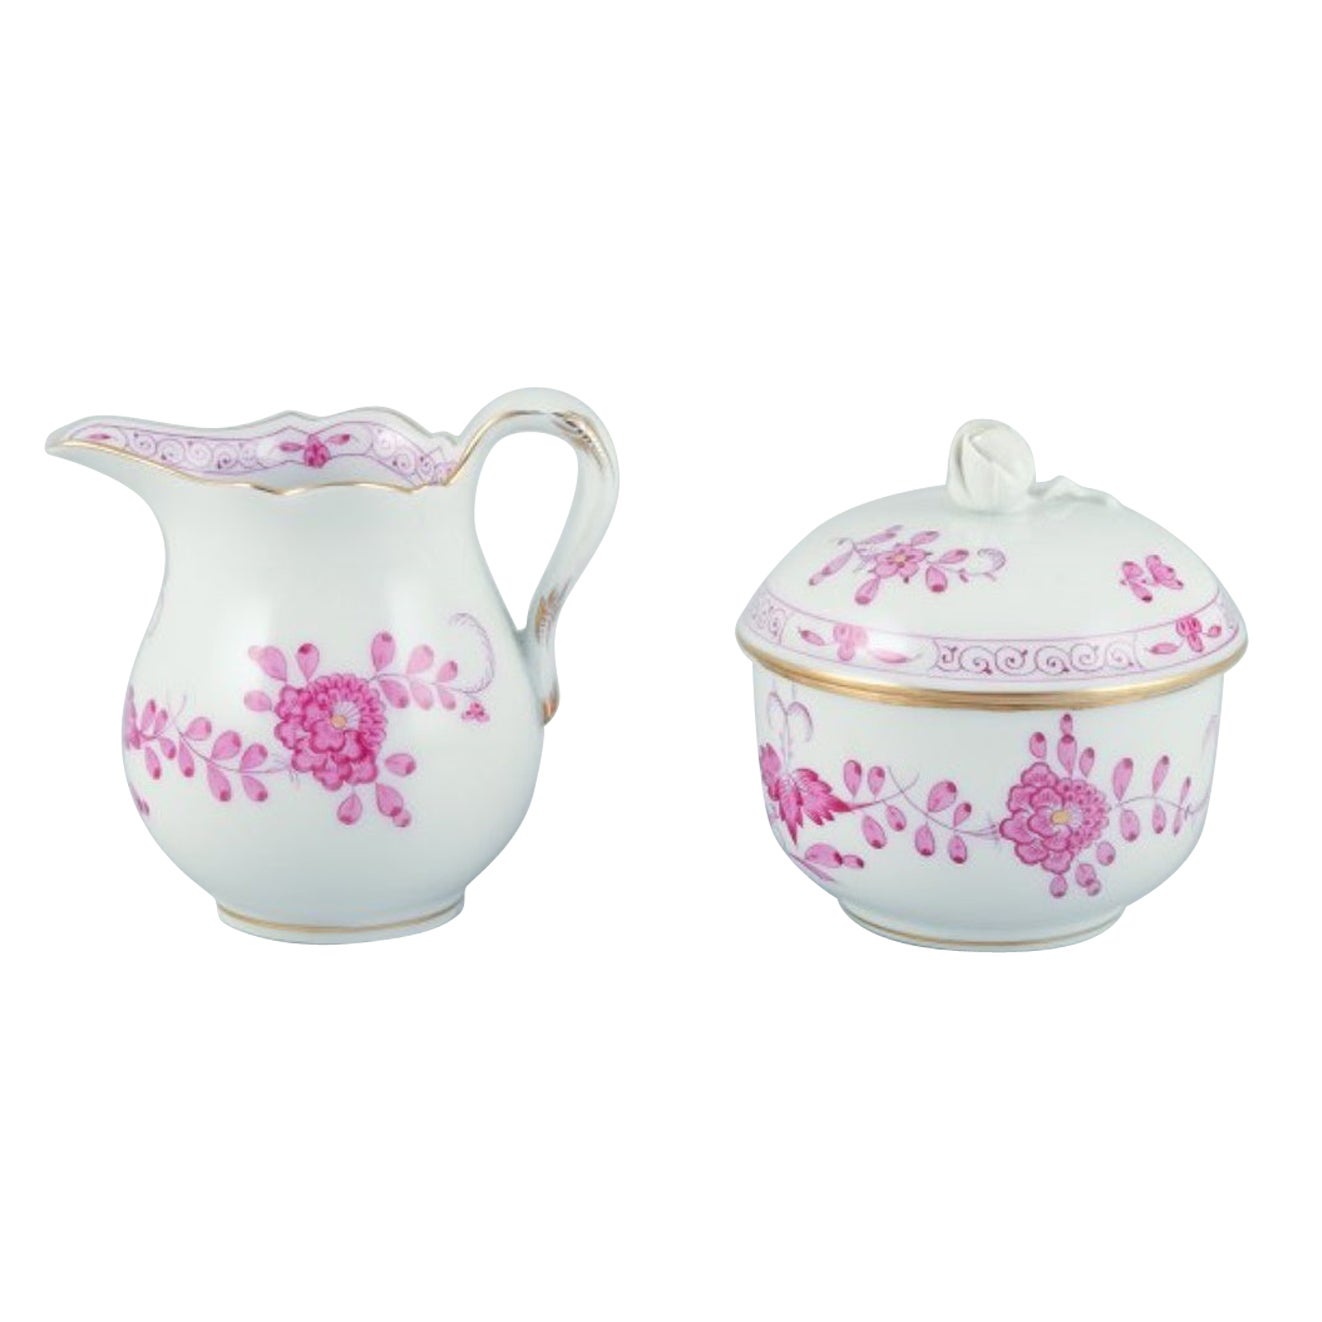 Meissen, Germany. Pink Indian sugar bowl and creamer in hand-painted porcelain. 